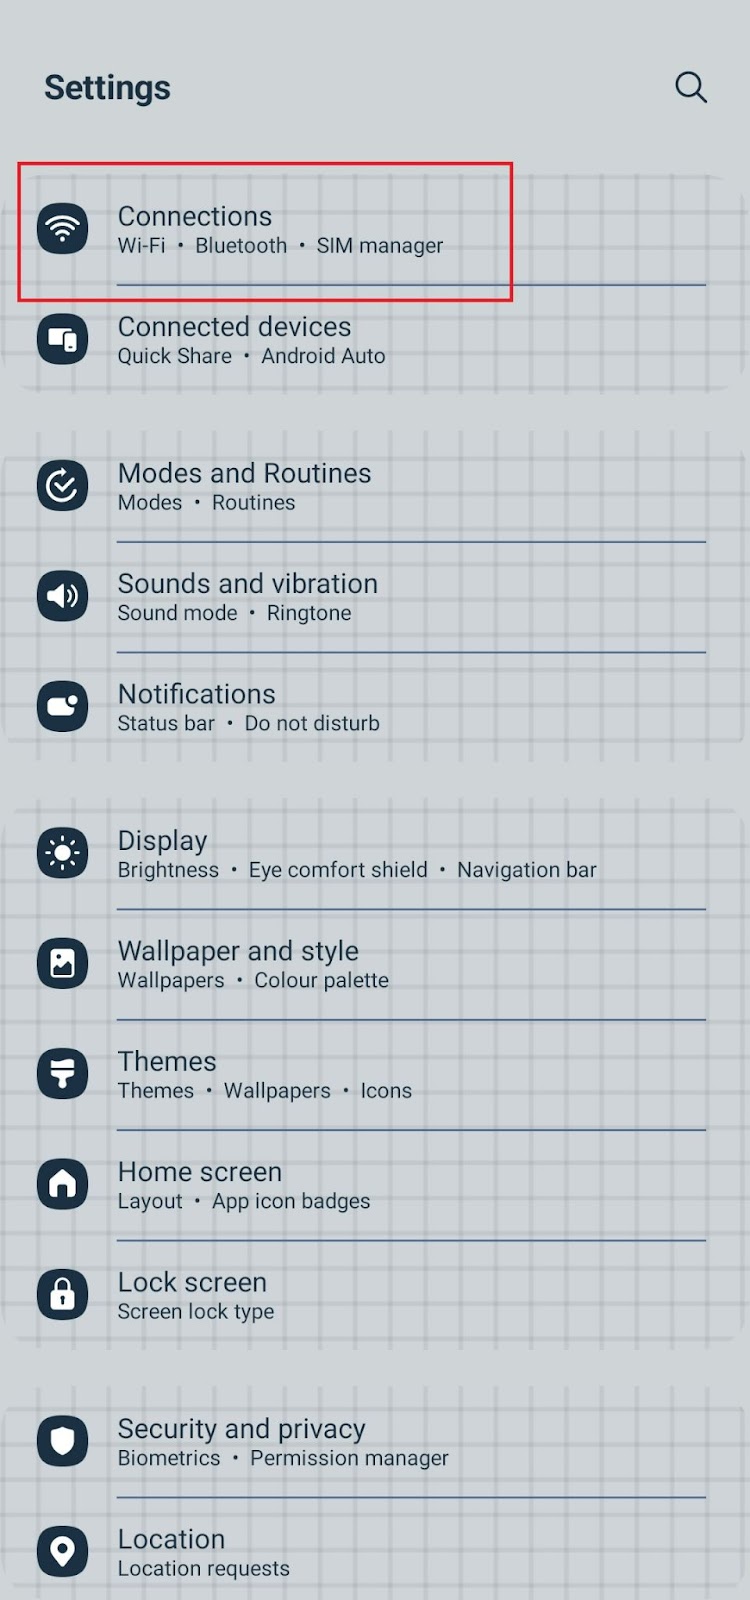 Screenshot of Network Settings on Android